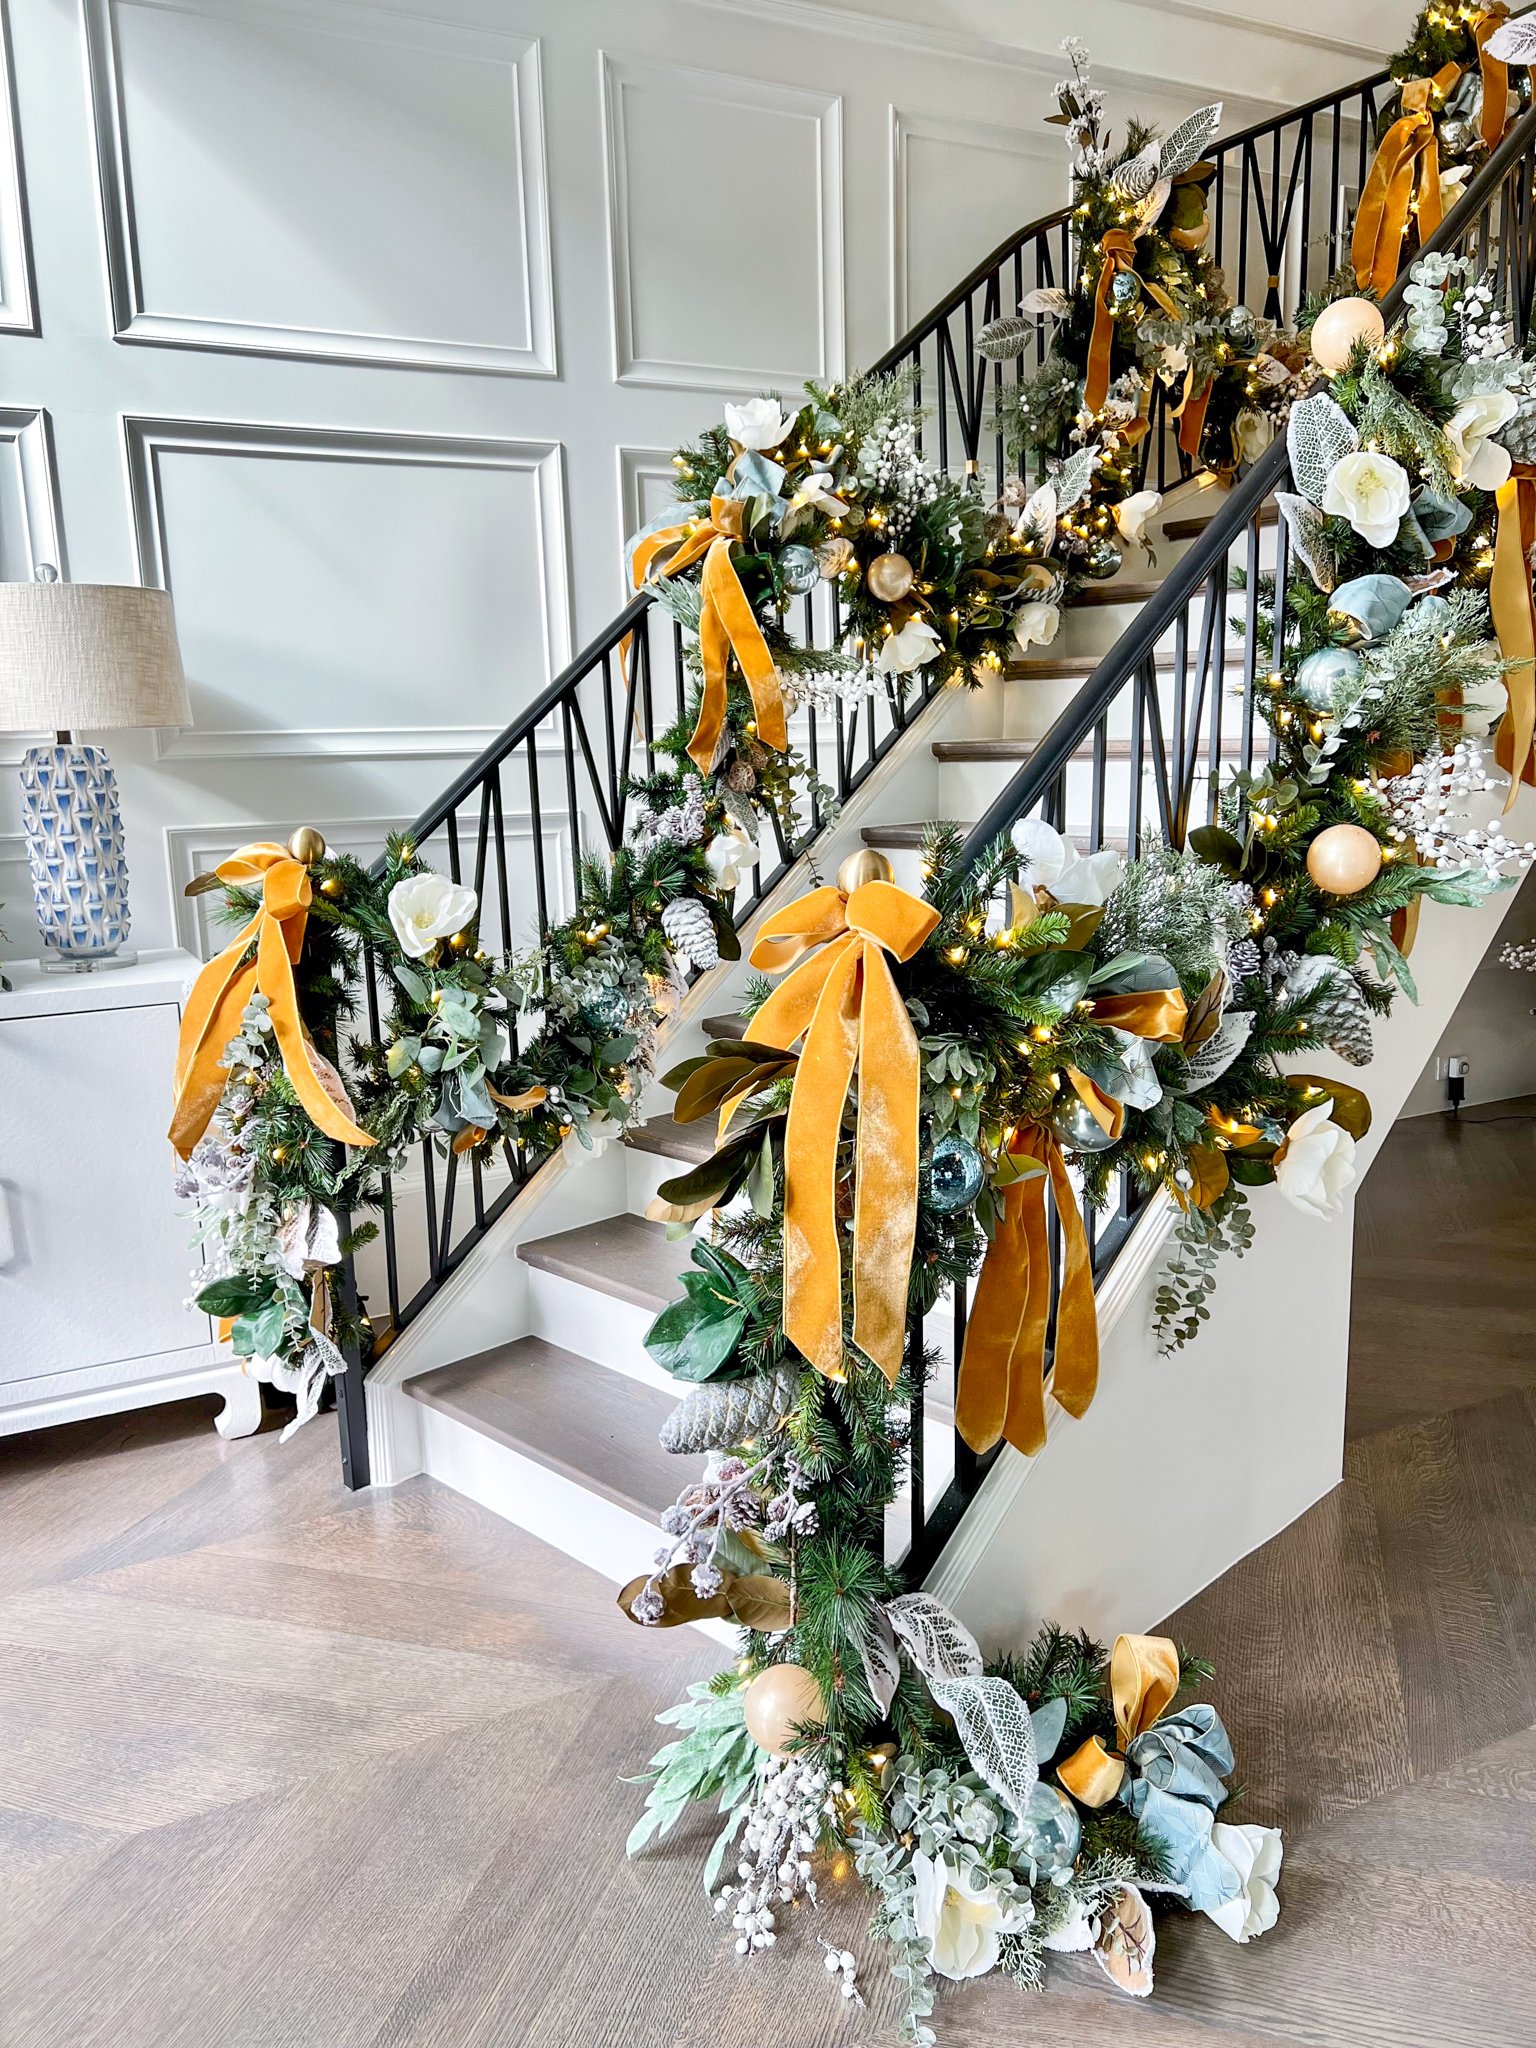 Green and silk floral garland wraps around staircase metal handrail with yellow ribbons